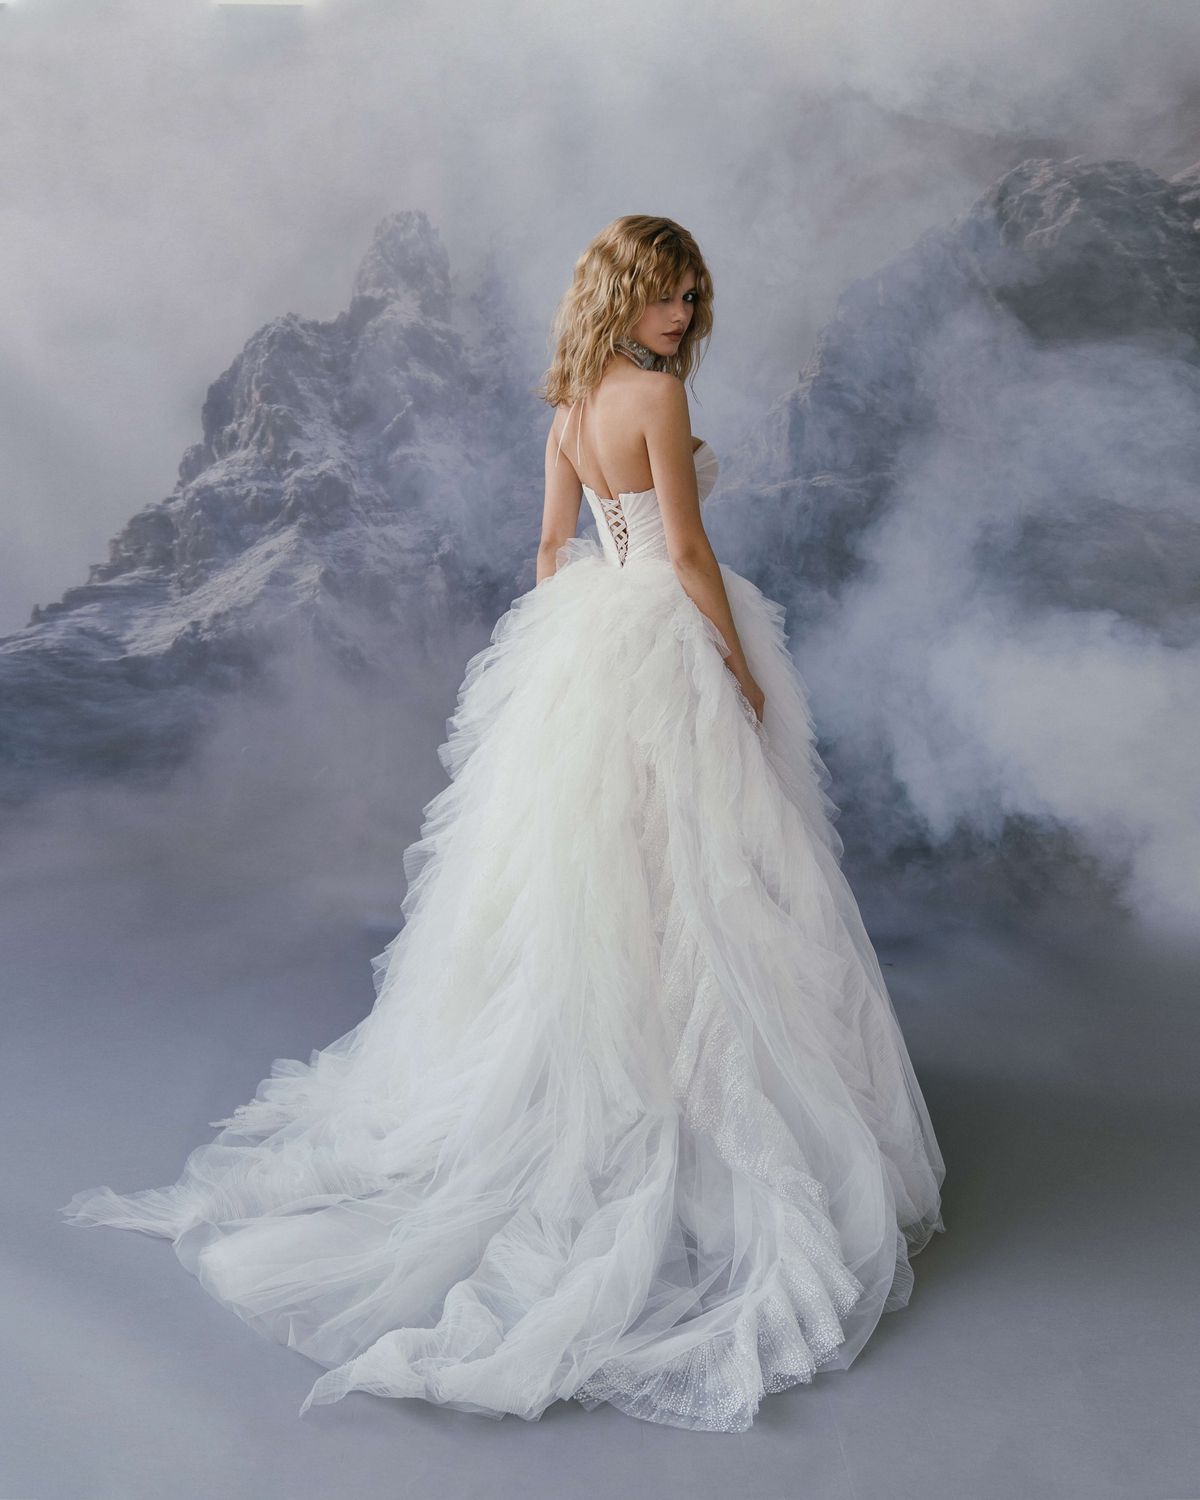 Rara Avis dreamy princess wedding dress Paskal with puffy skirt with layers at Dell'Amore , Auckland, NZ.3